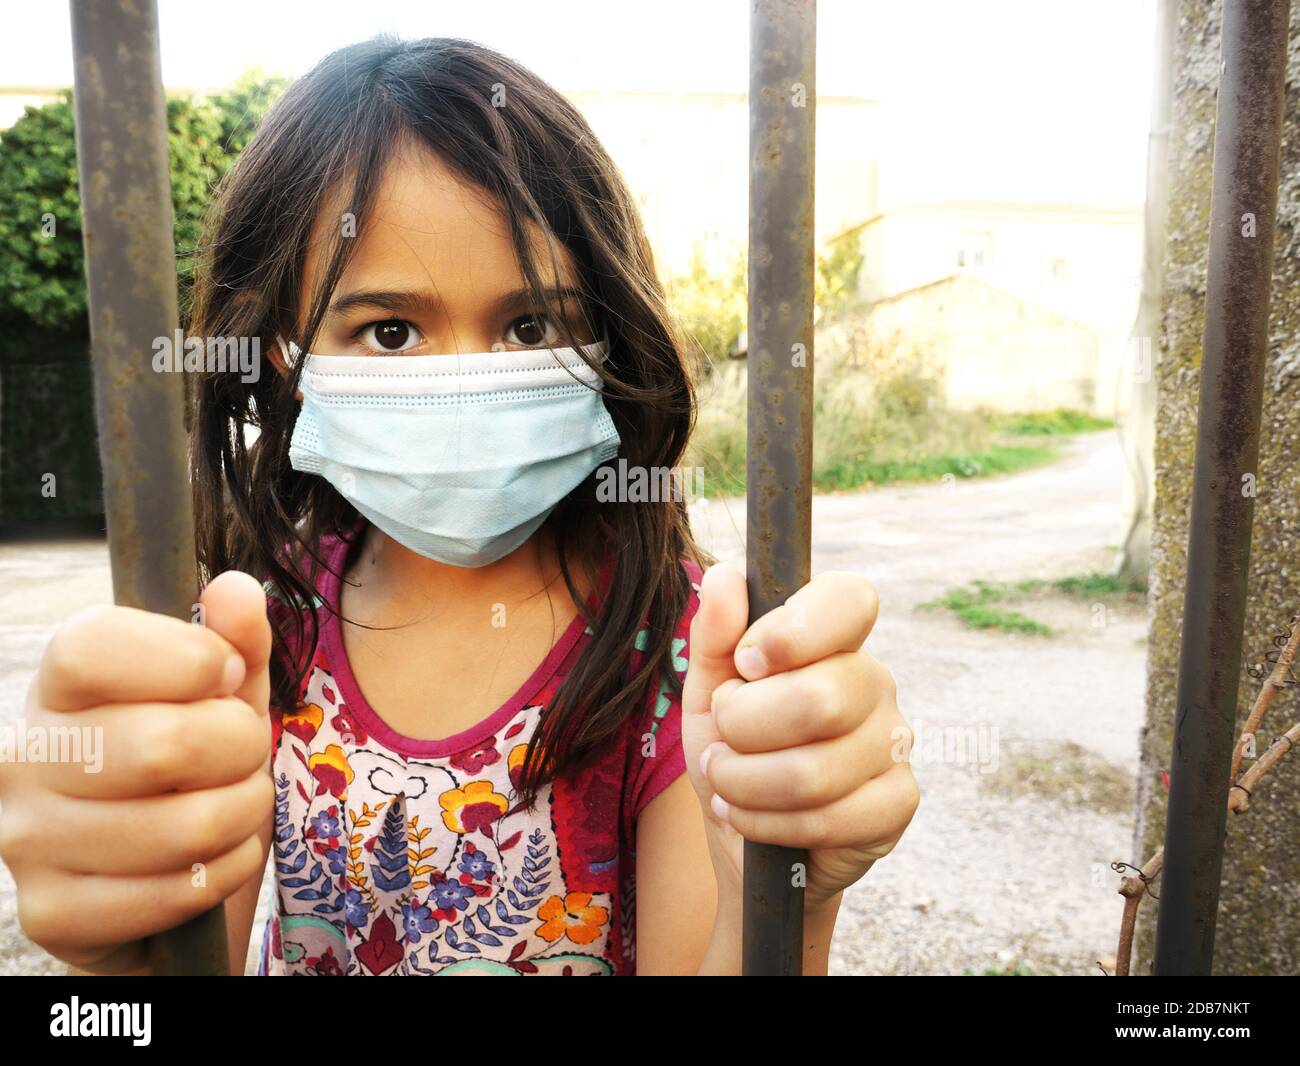 Photo of a little girl wearing a mask and holding bars Stock Photo